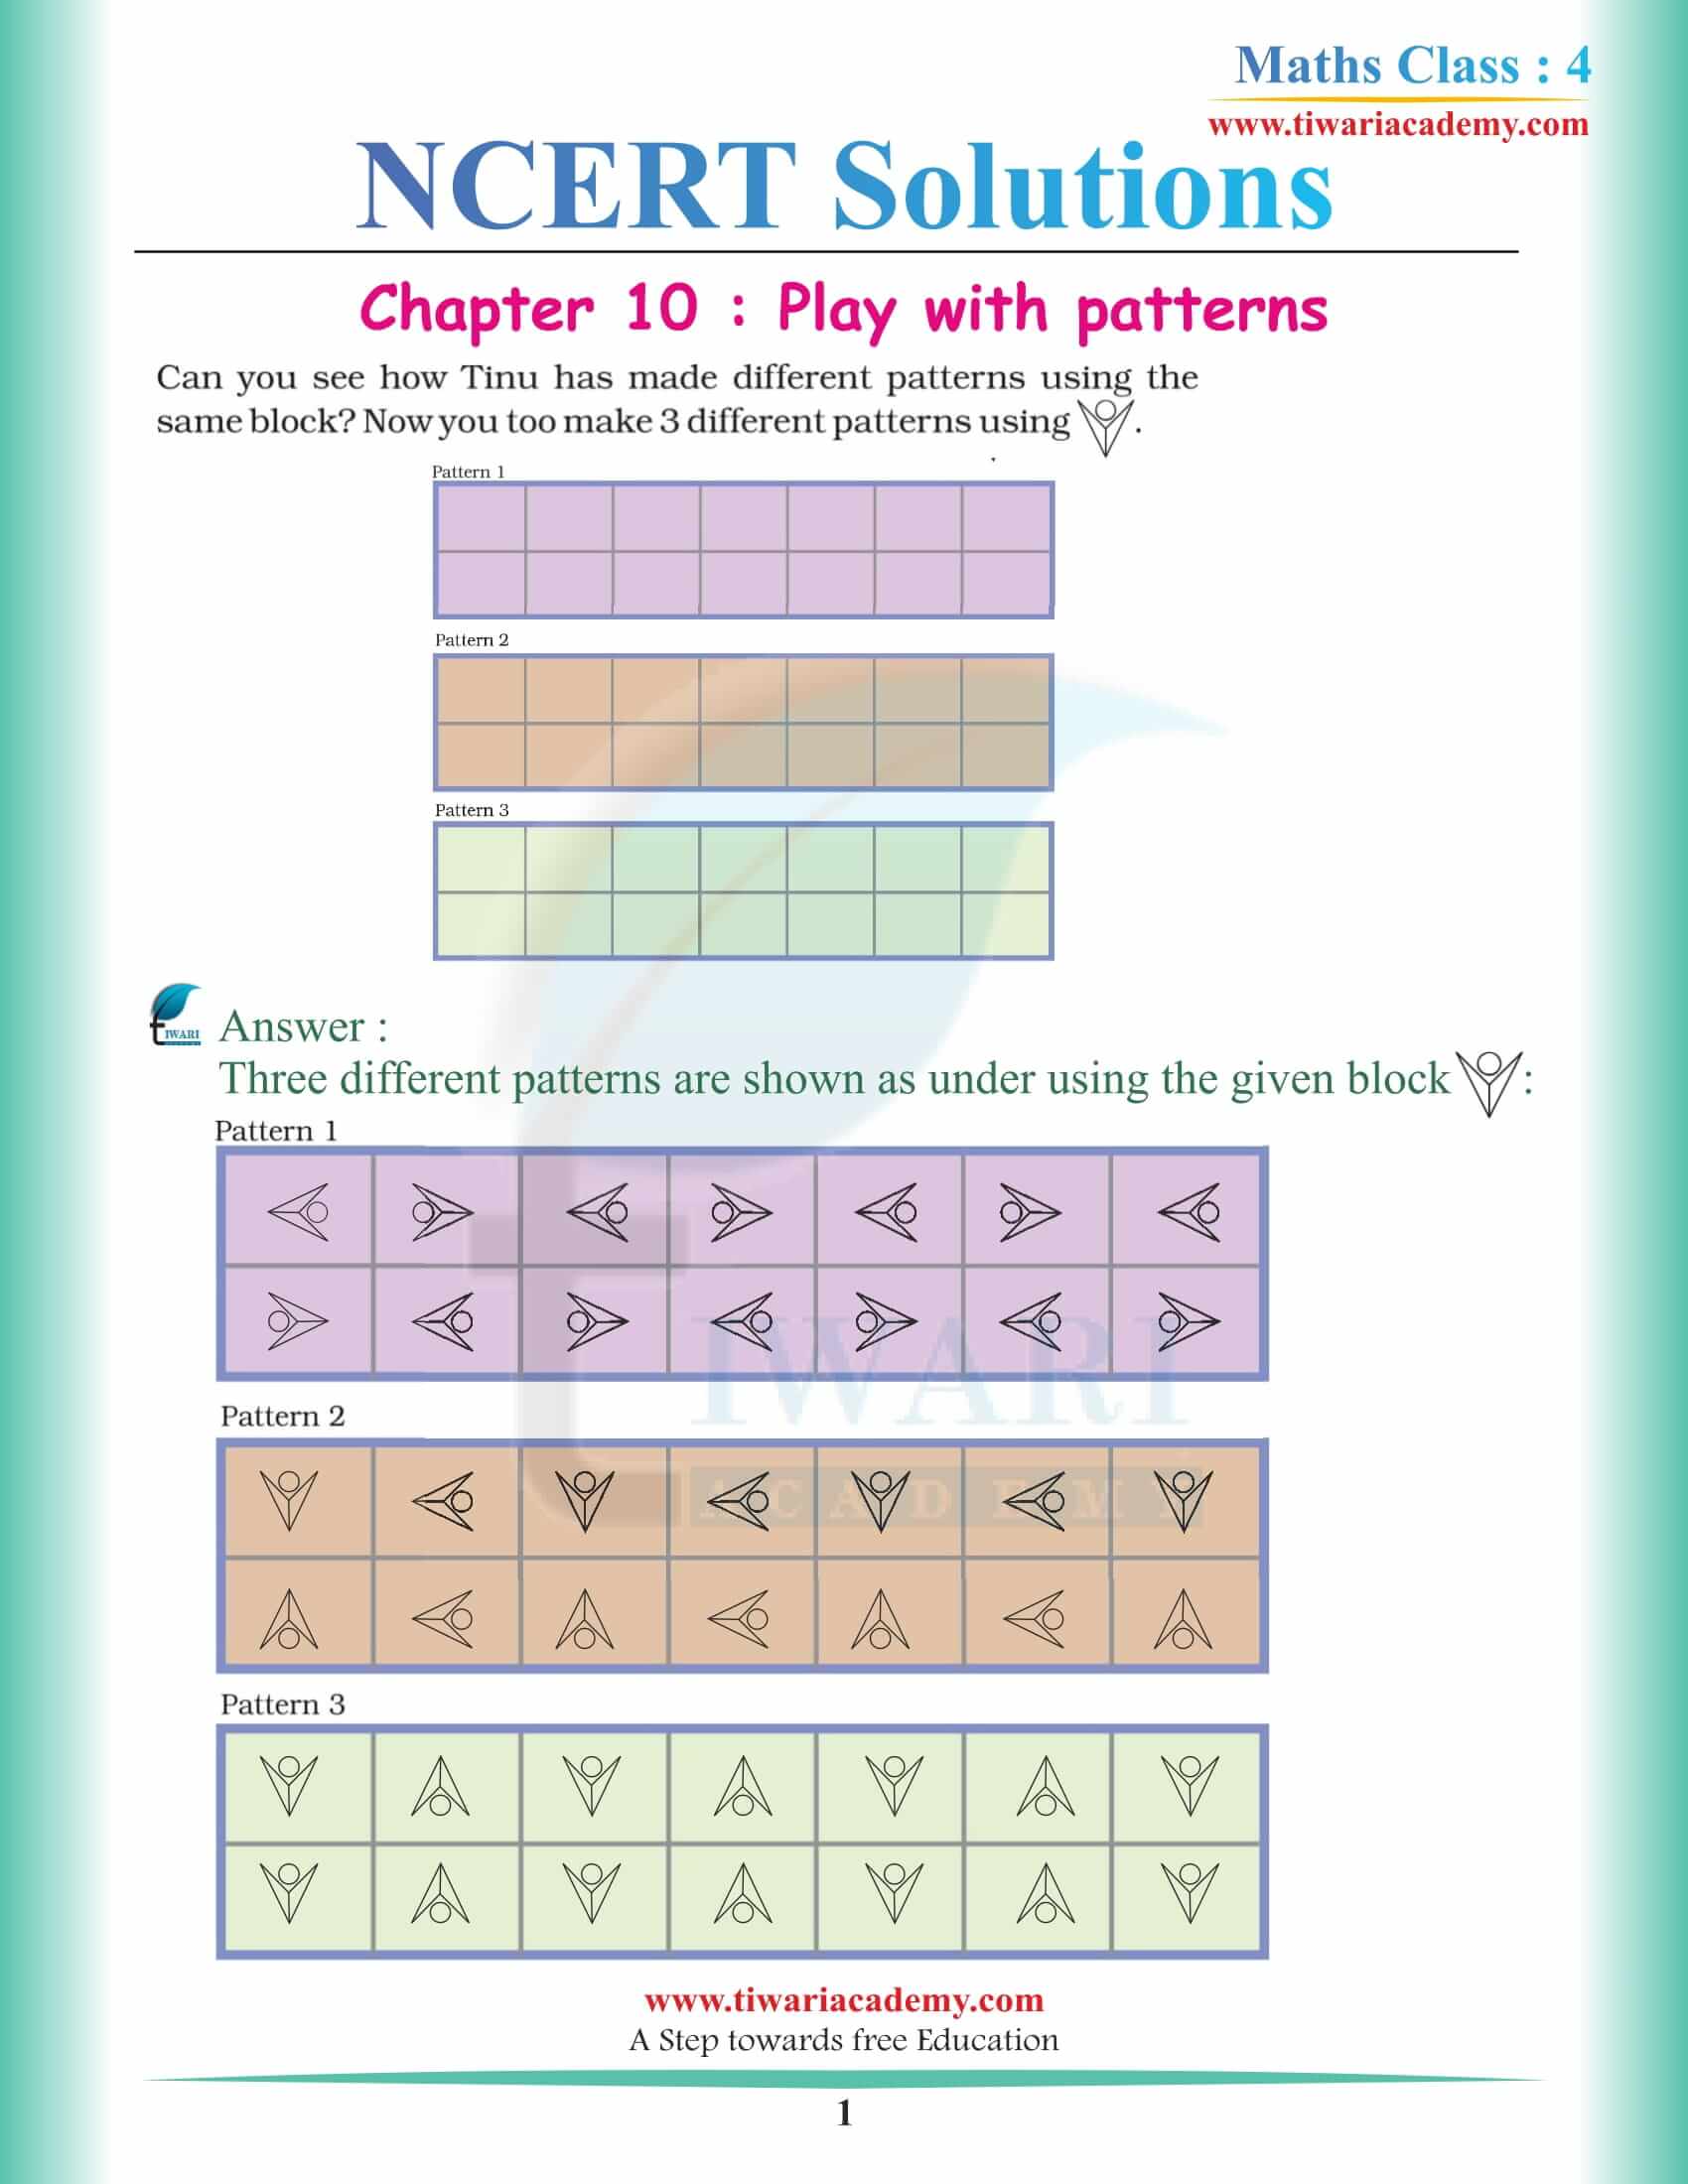 NCERT Solutions for Class 4 Maths Chapter 10 Play with Patterns